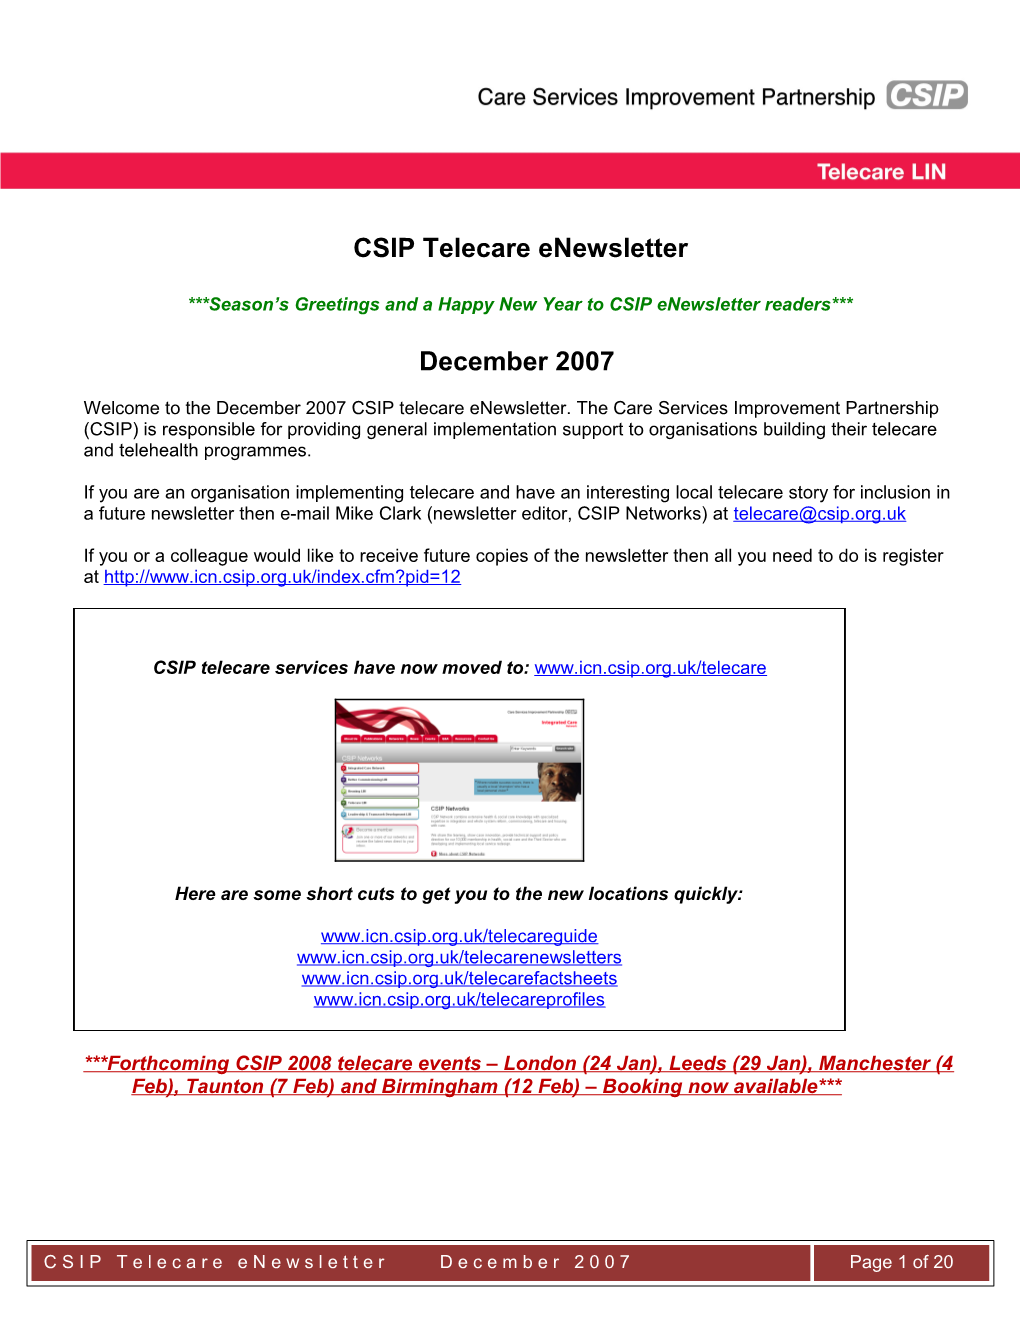 Season S Greetings and a Happy New Year to CSIP Enewsletter Readers